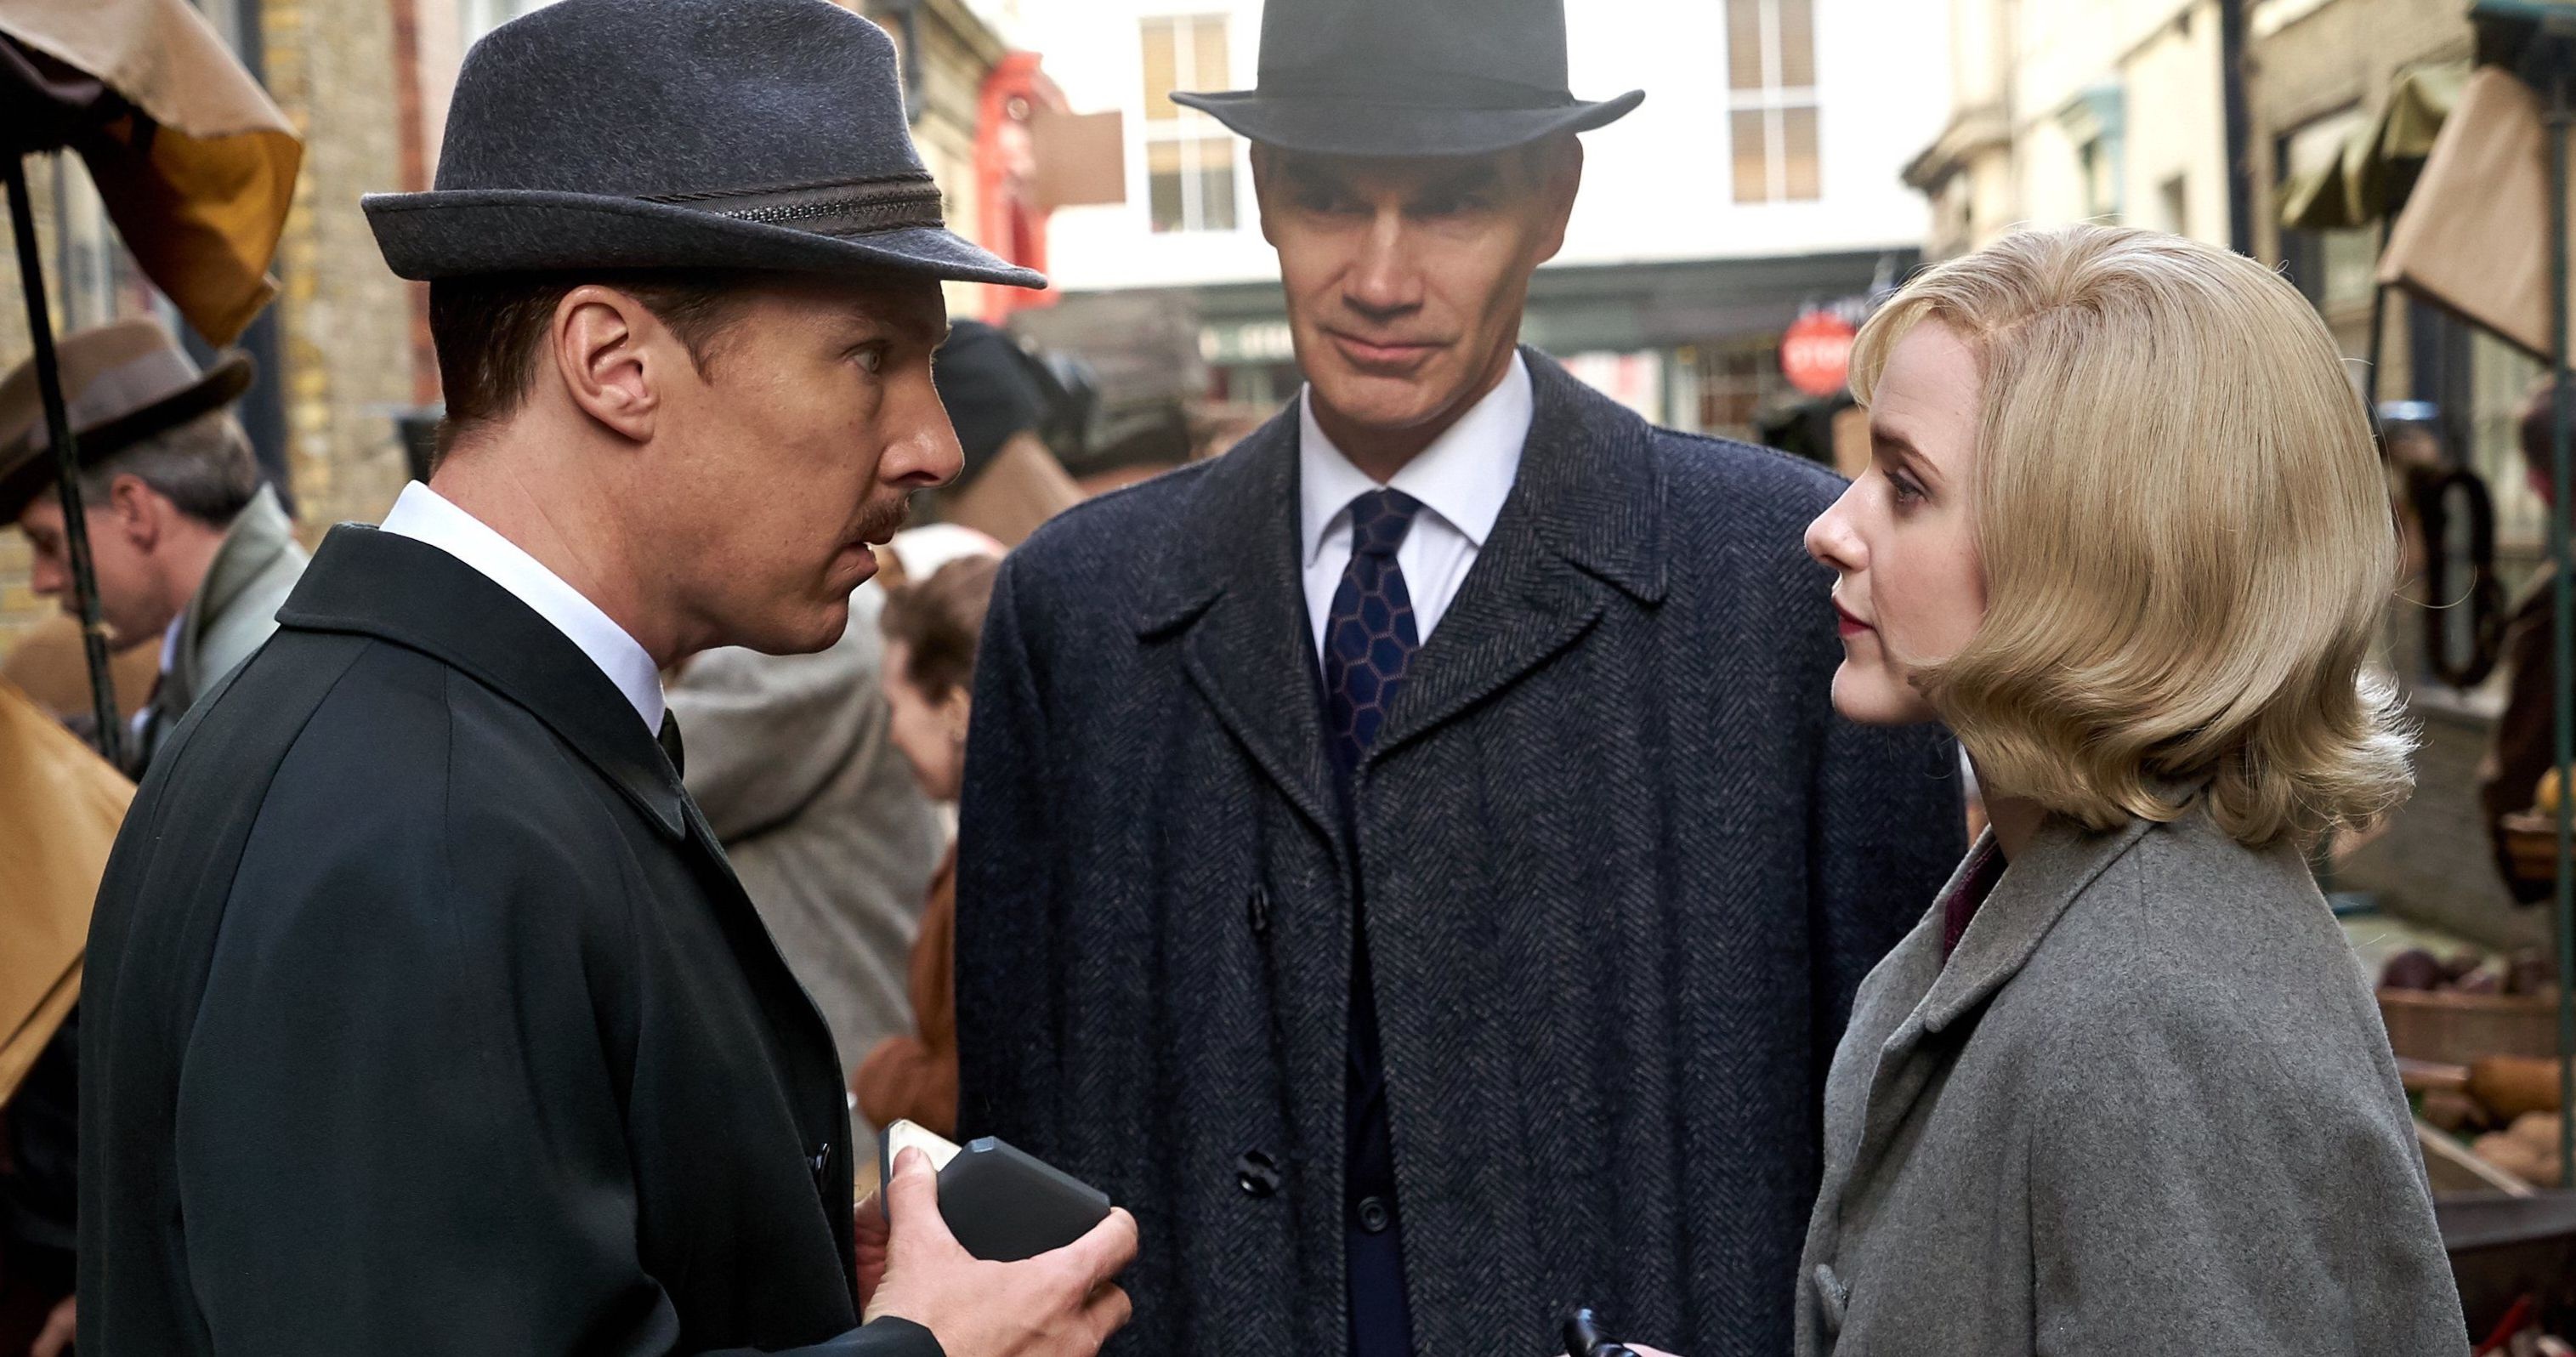 The Courier, Benedict Cumberbatch, Losing weight, Horrible experience, 3030x1600 HD Desktop